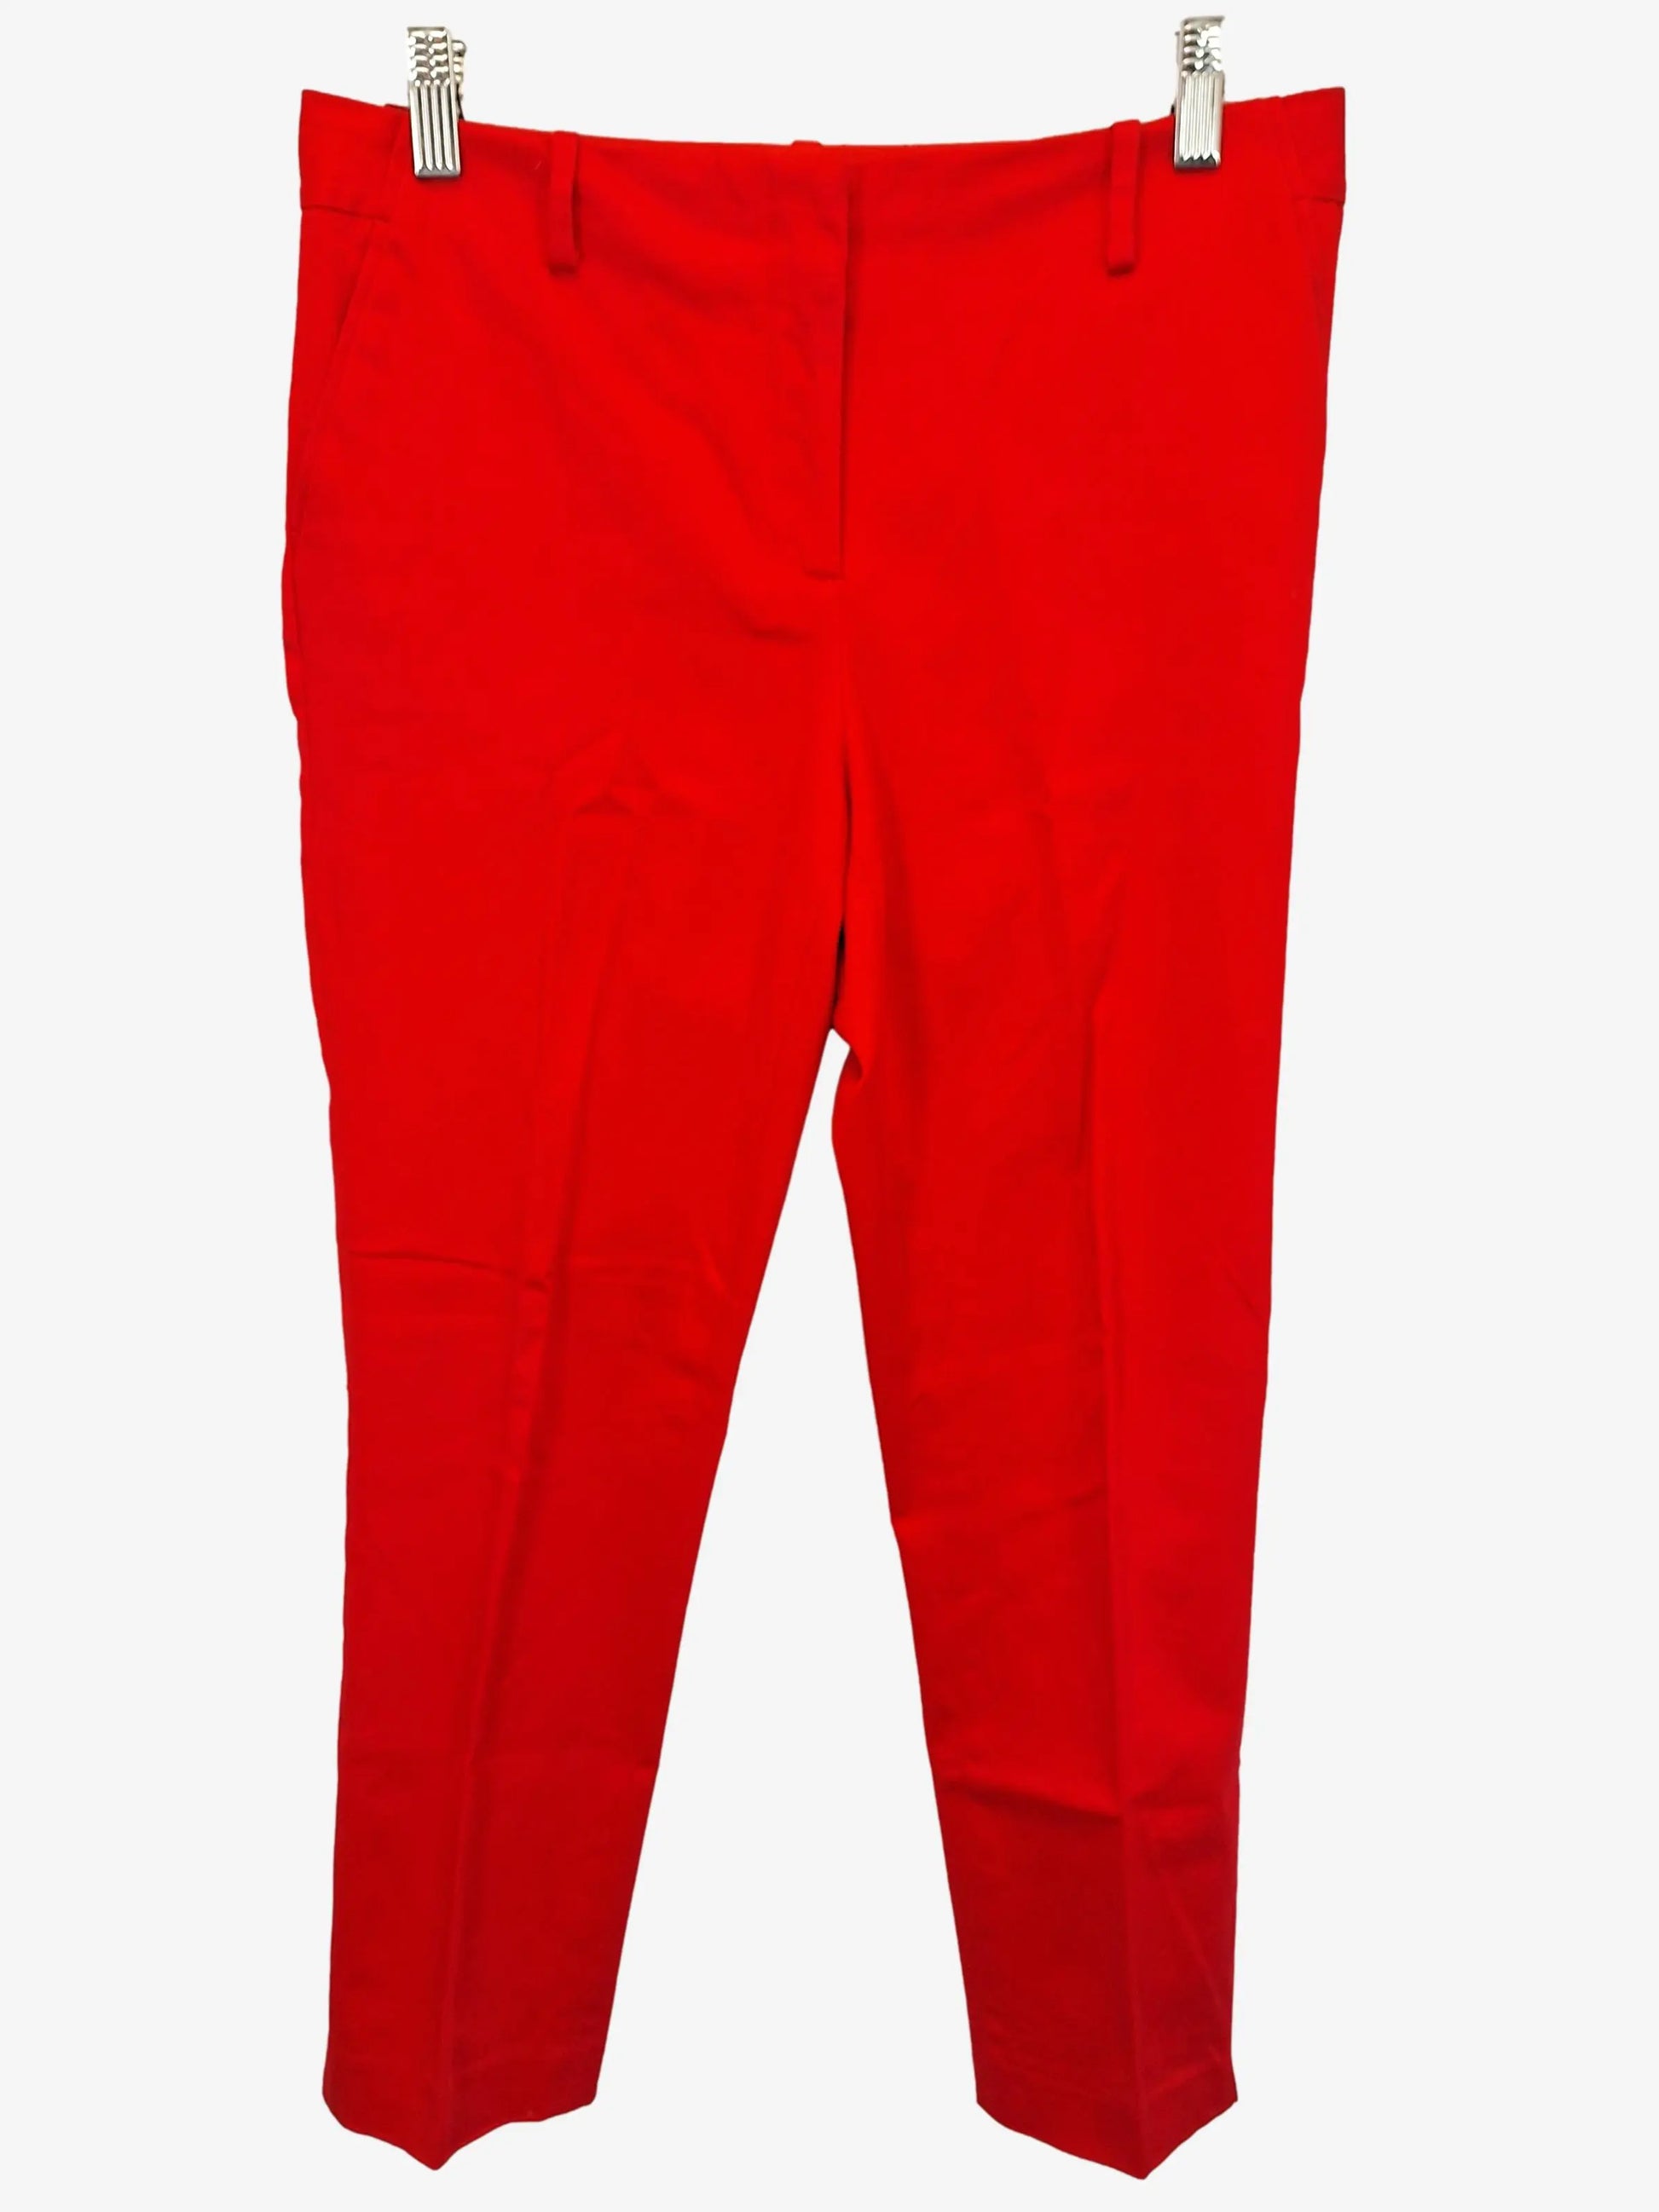 Red Pants (Size 10)